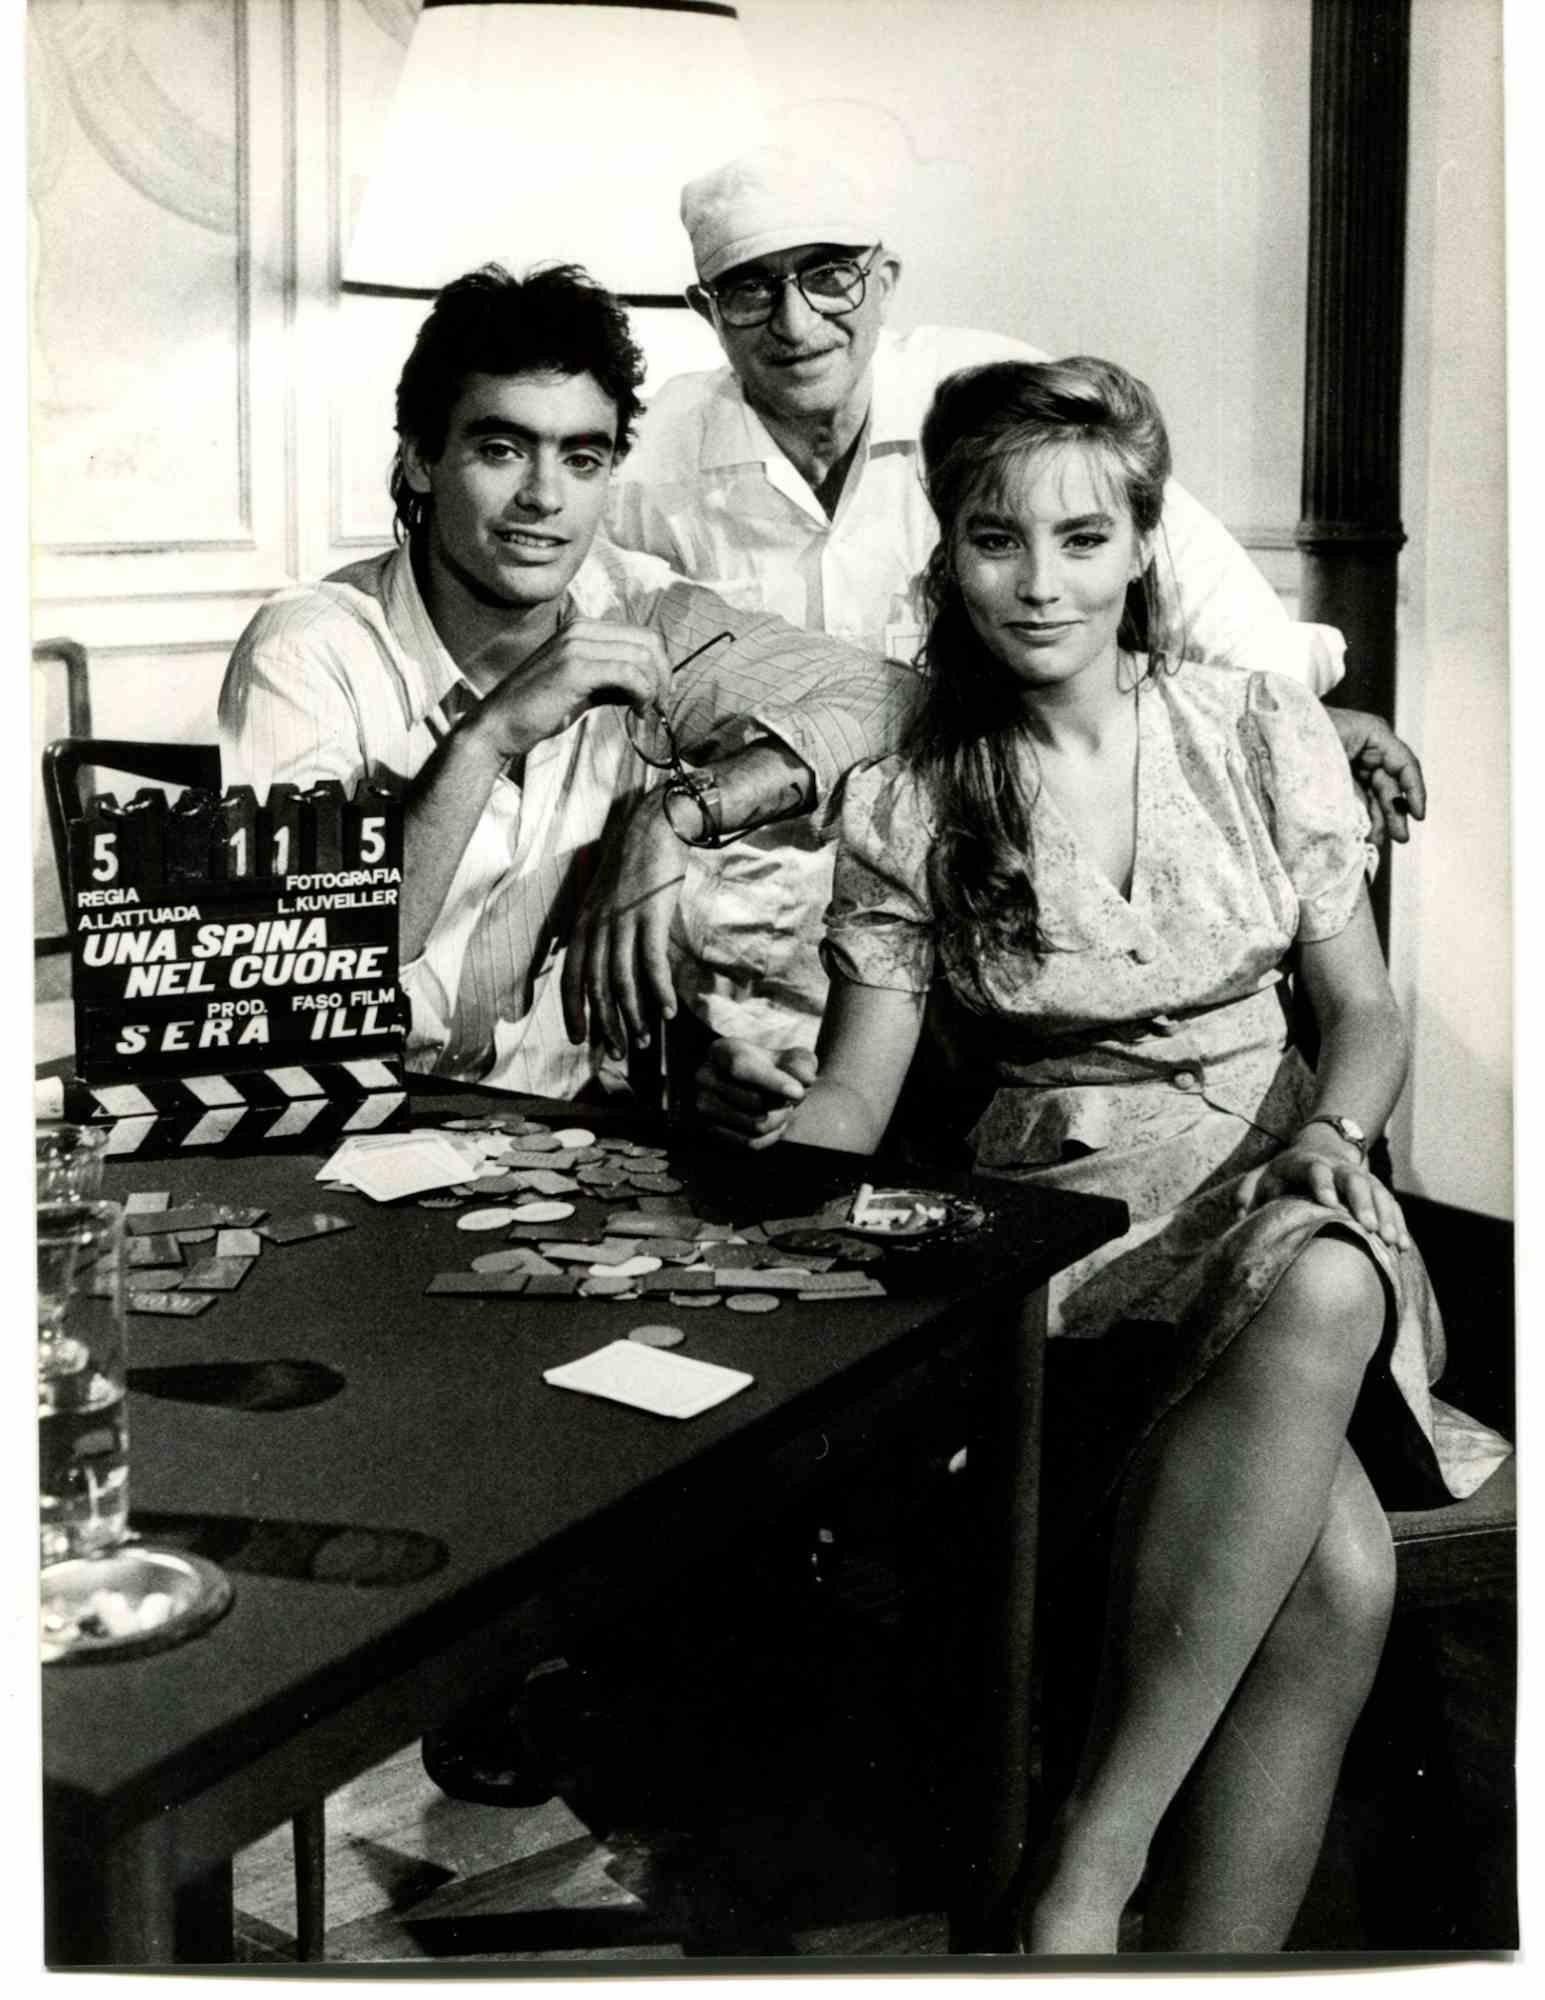 Unknown Portrait Photograph - Anthony Delon , Sophie Duez and  Alberto Lattuada in A Thorn  - Photo - 1986